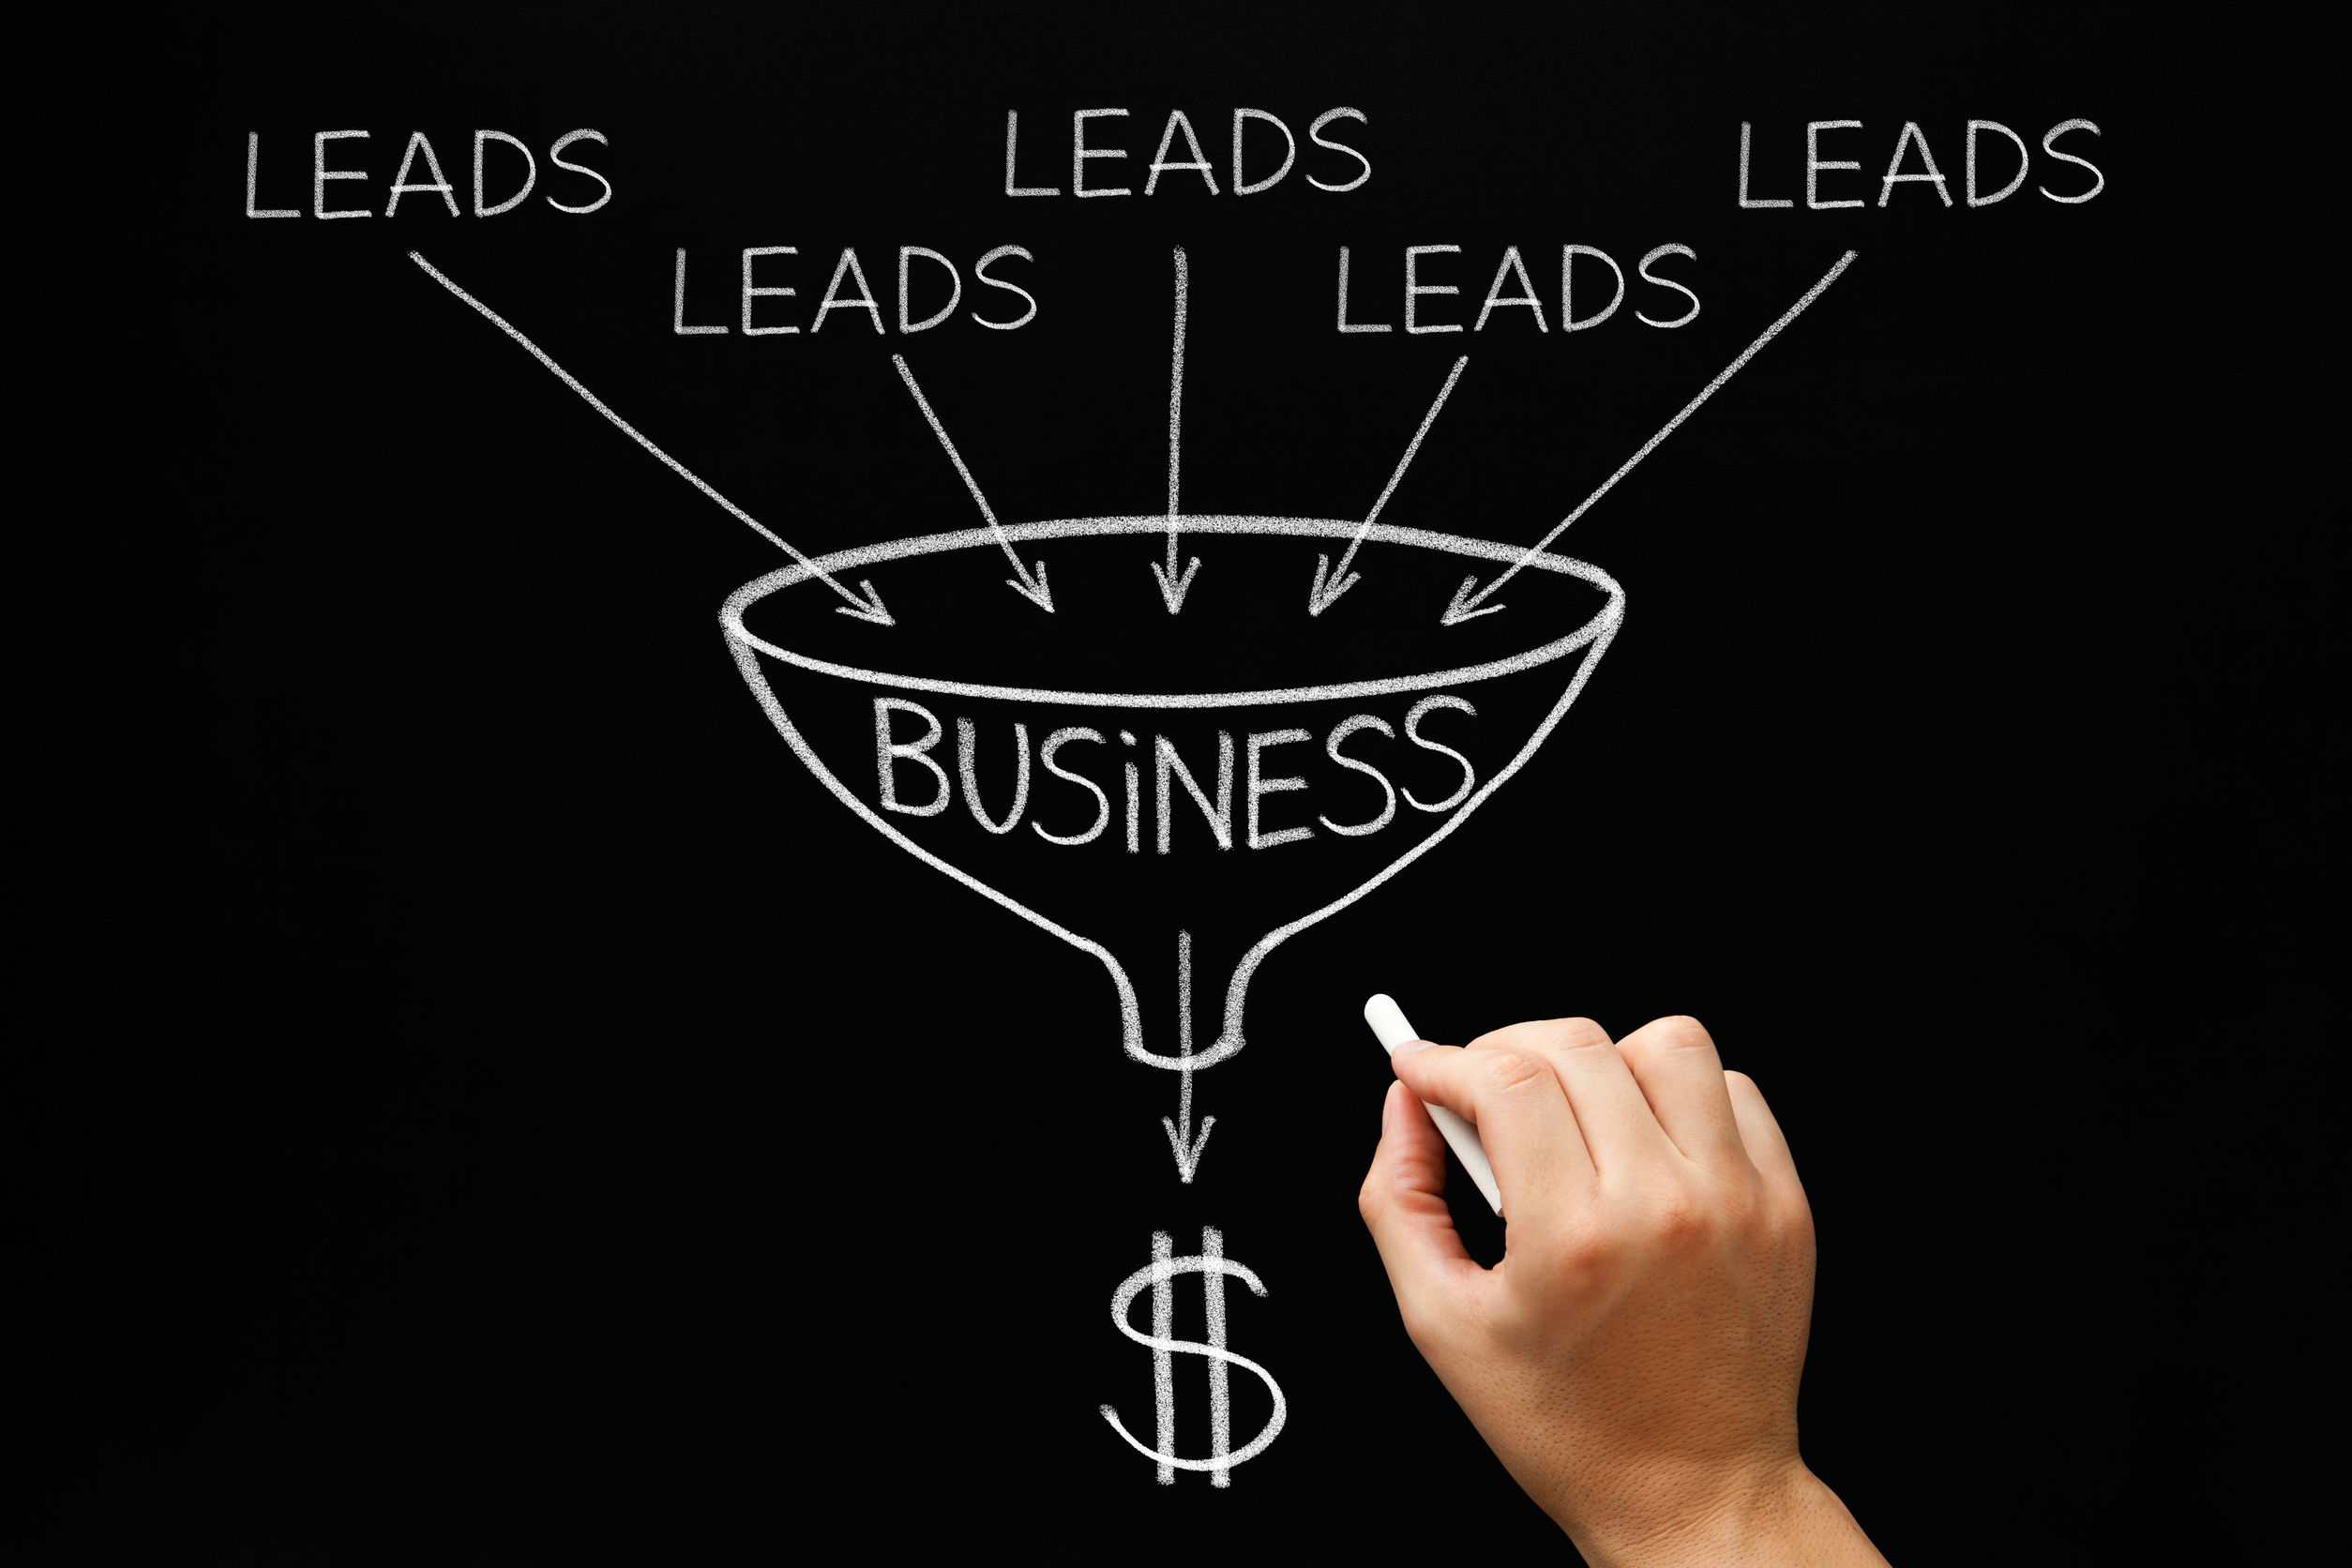 Lead funnels are vital for getting more sales.